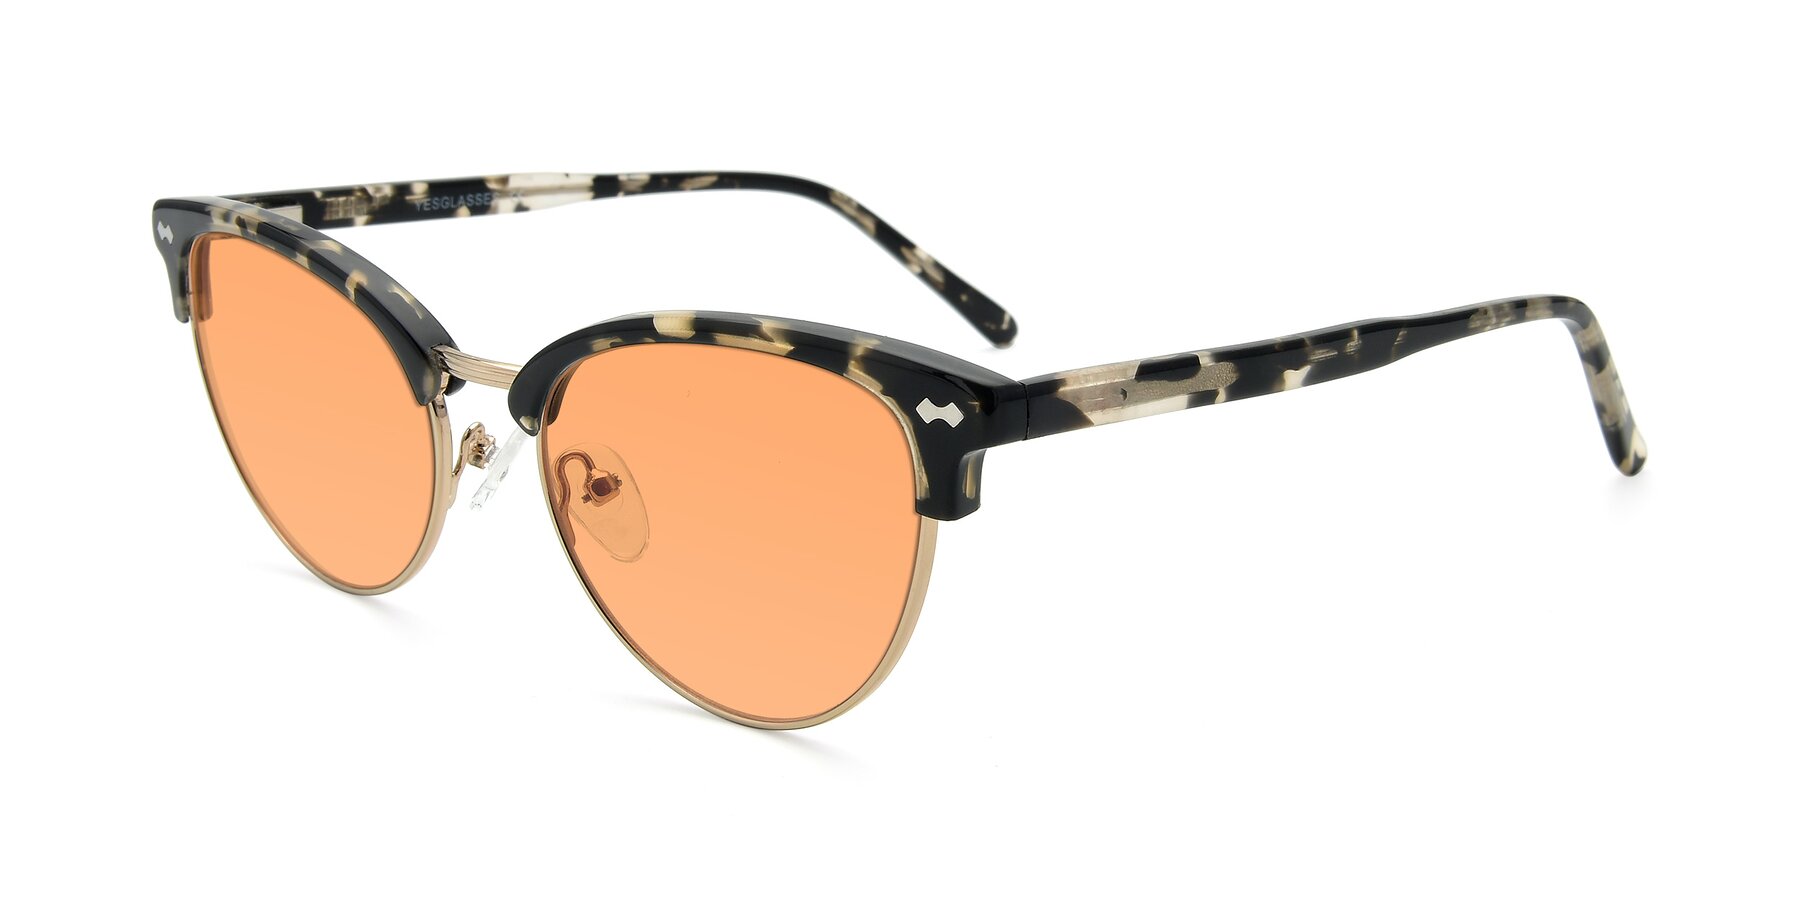 Angle of 17461 in Tortoise-Gold with Medium Orange Tinted Lenses